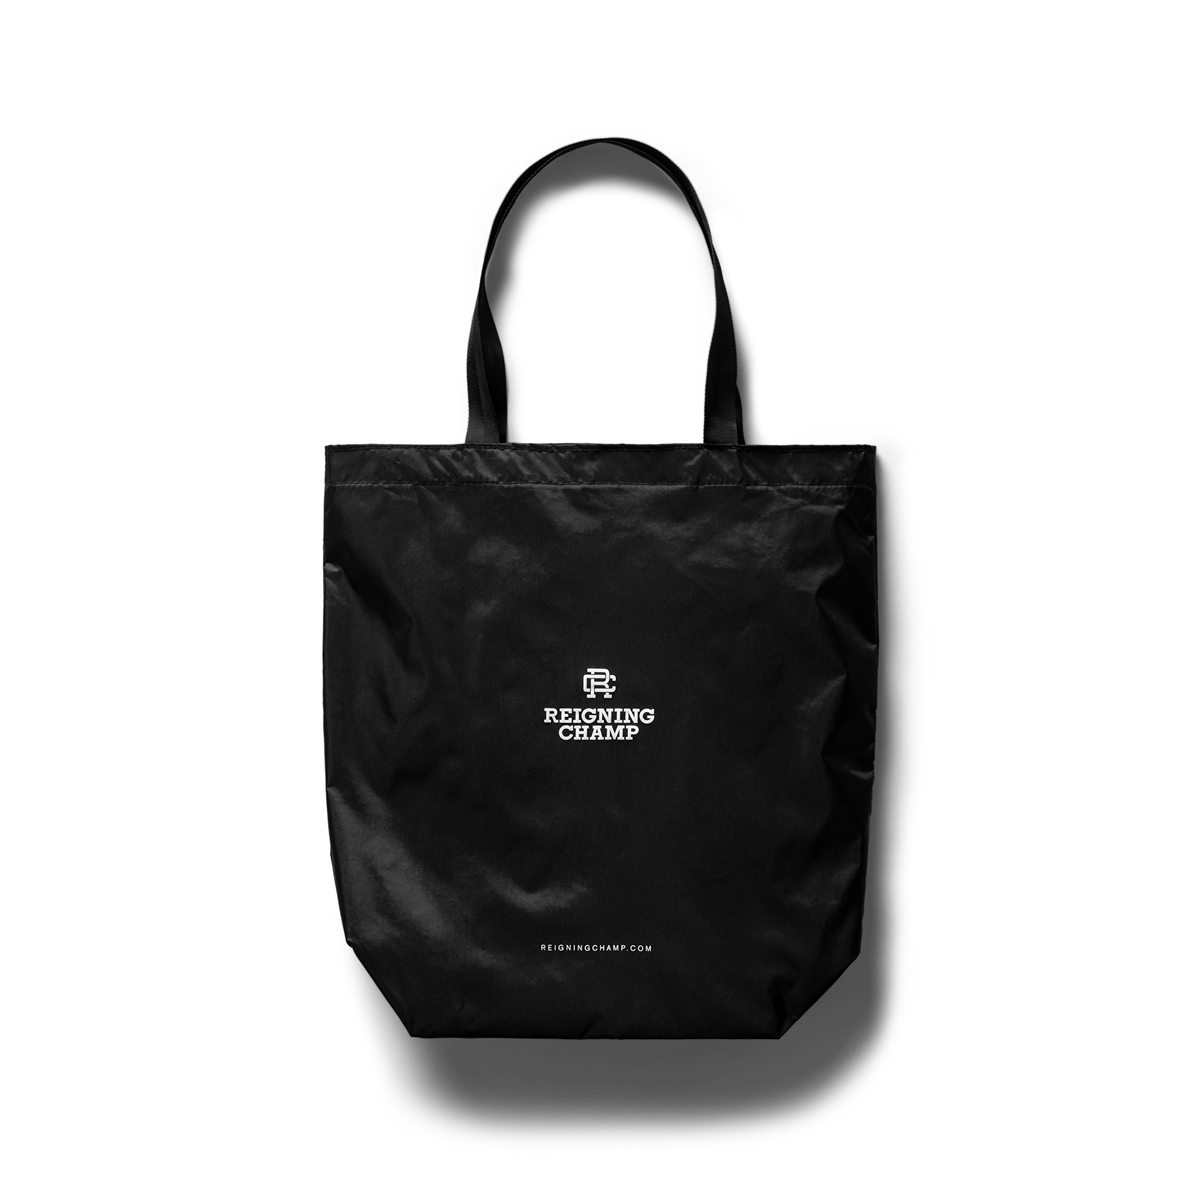 Complimentary Tote Bag - Reigning Champ 